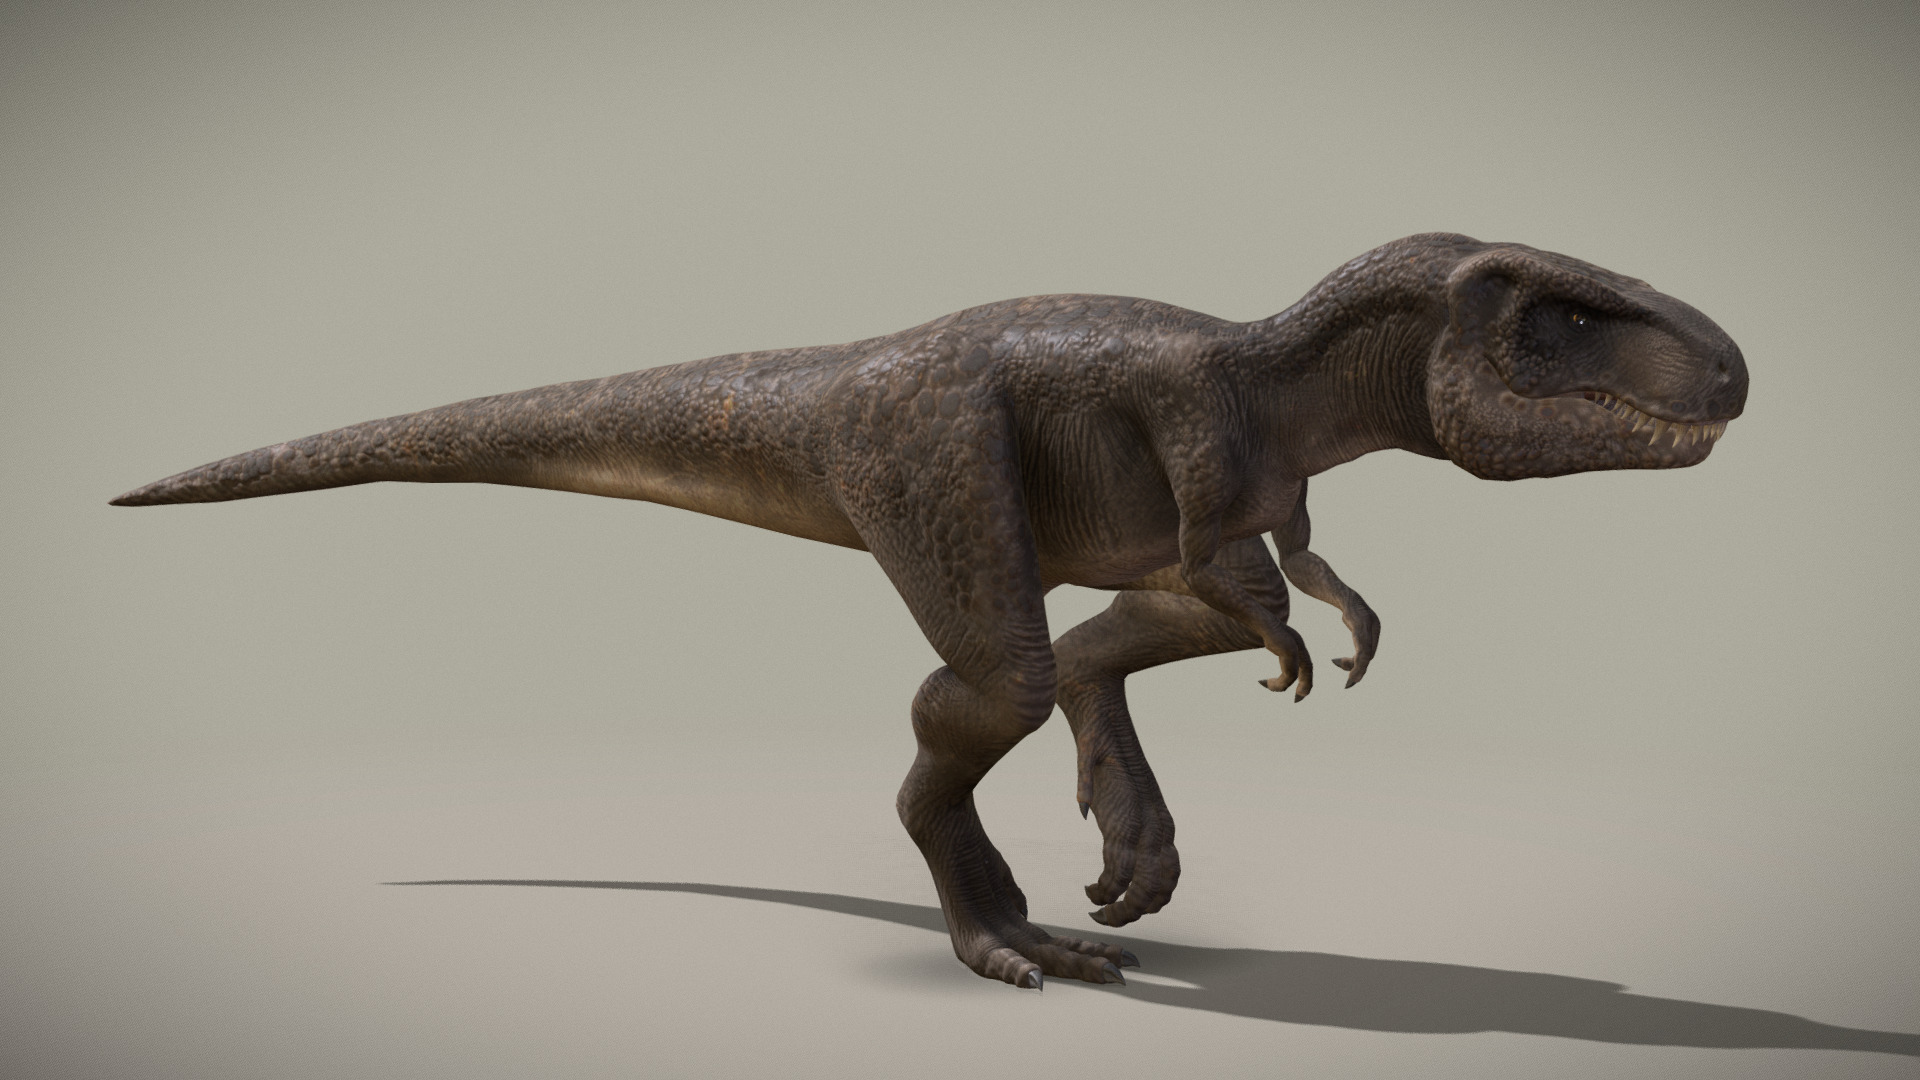 3D model Young Tyrannosaurus Rex - This is a 3D model of the Young Tyrannosaurus Rex. The 3D model is about a dinosaur with a long neck.